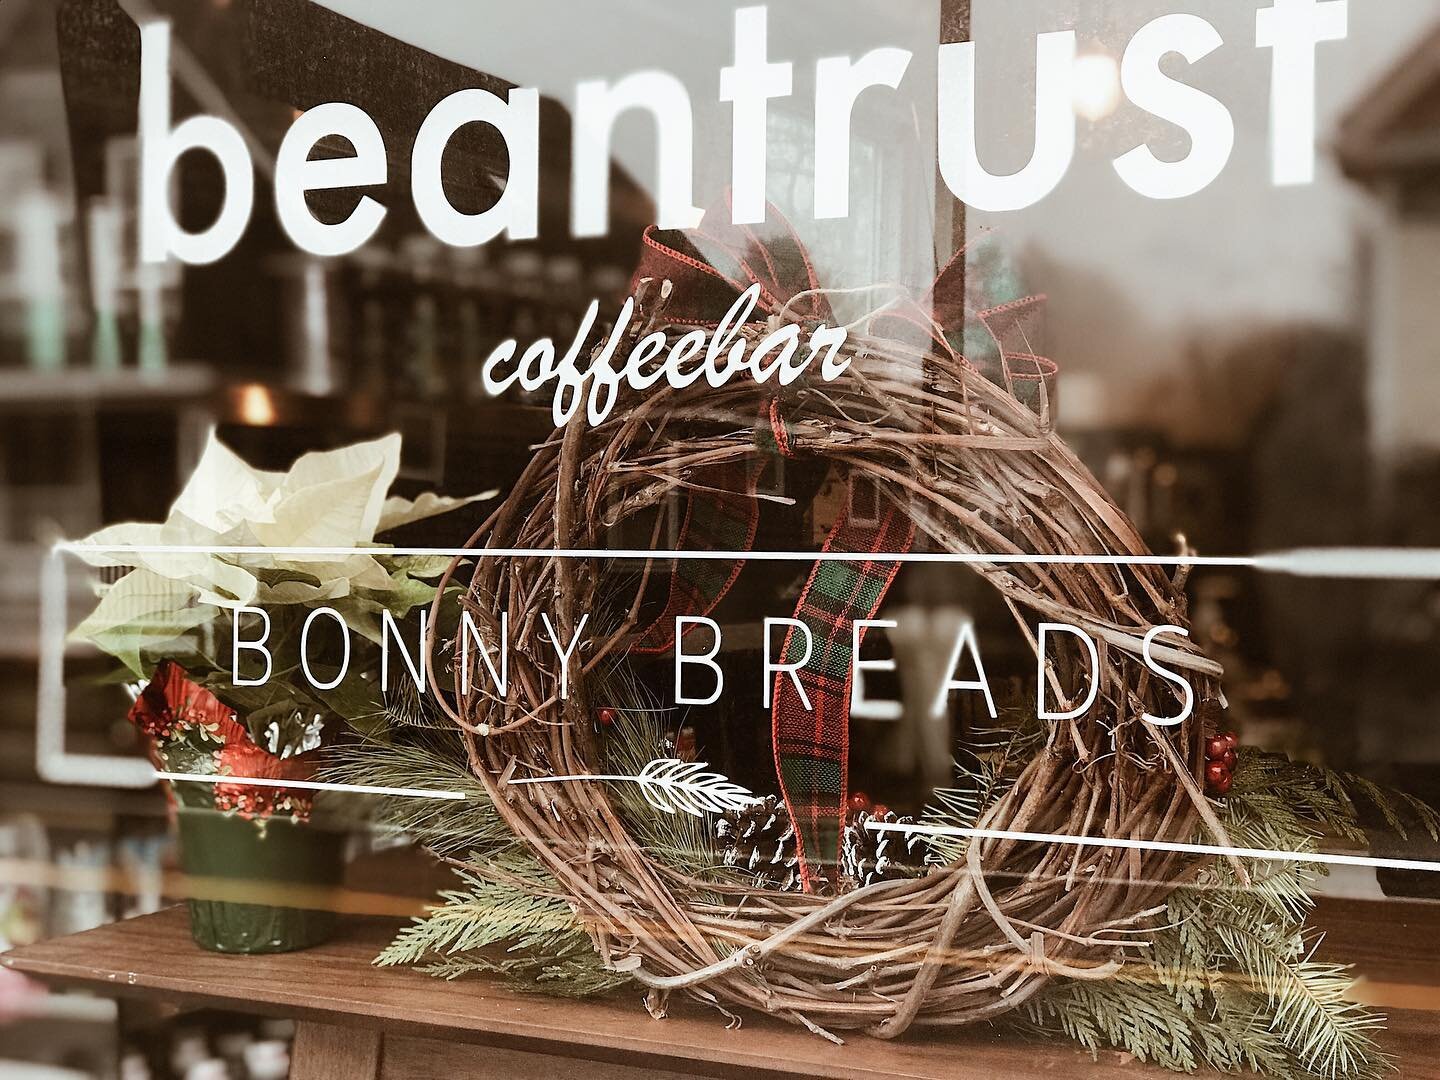 Merry Christmas from beantrust coffeebar!  We will be closed on Friday and Saturday but back with coffee and conversation on Sunday the 27th.

#beantrustcoffeebar #beverlymassachusetts
#beantrustcommunity